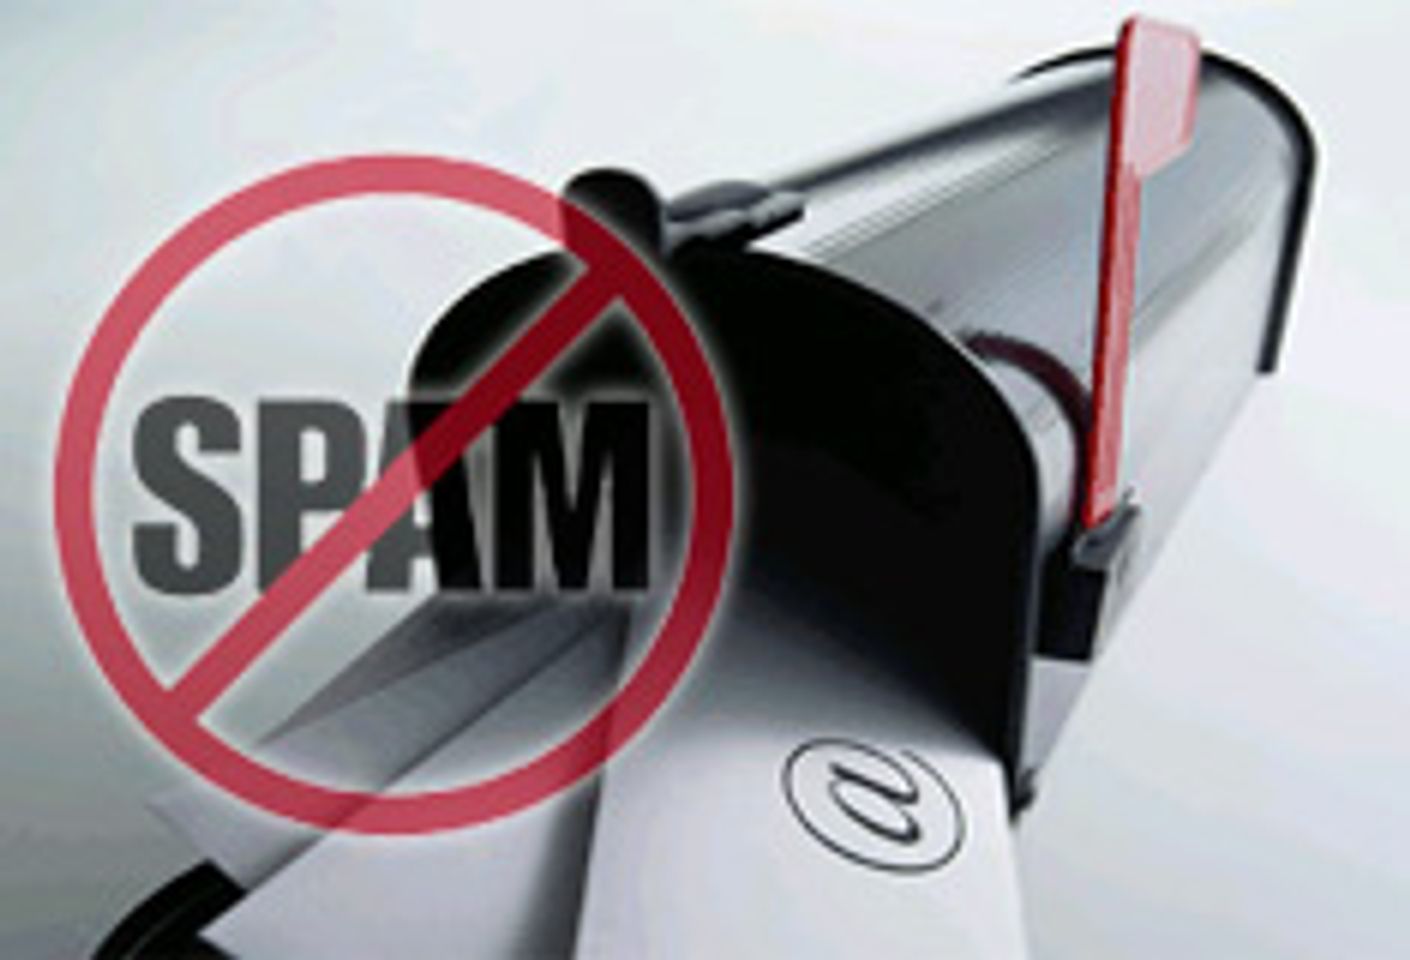 Google Has a Tool to Trick Link Spammers